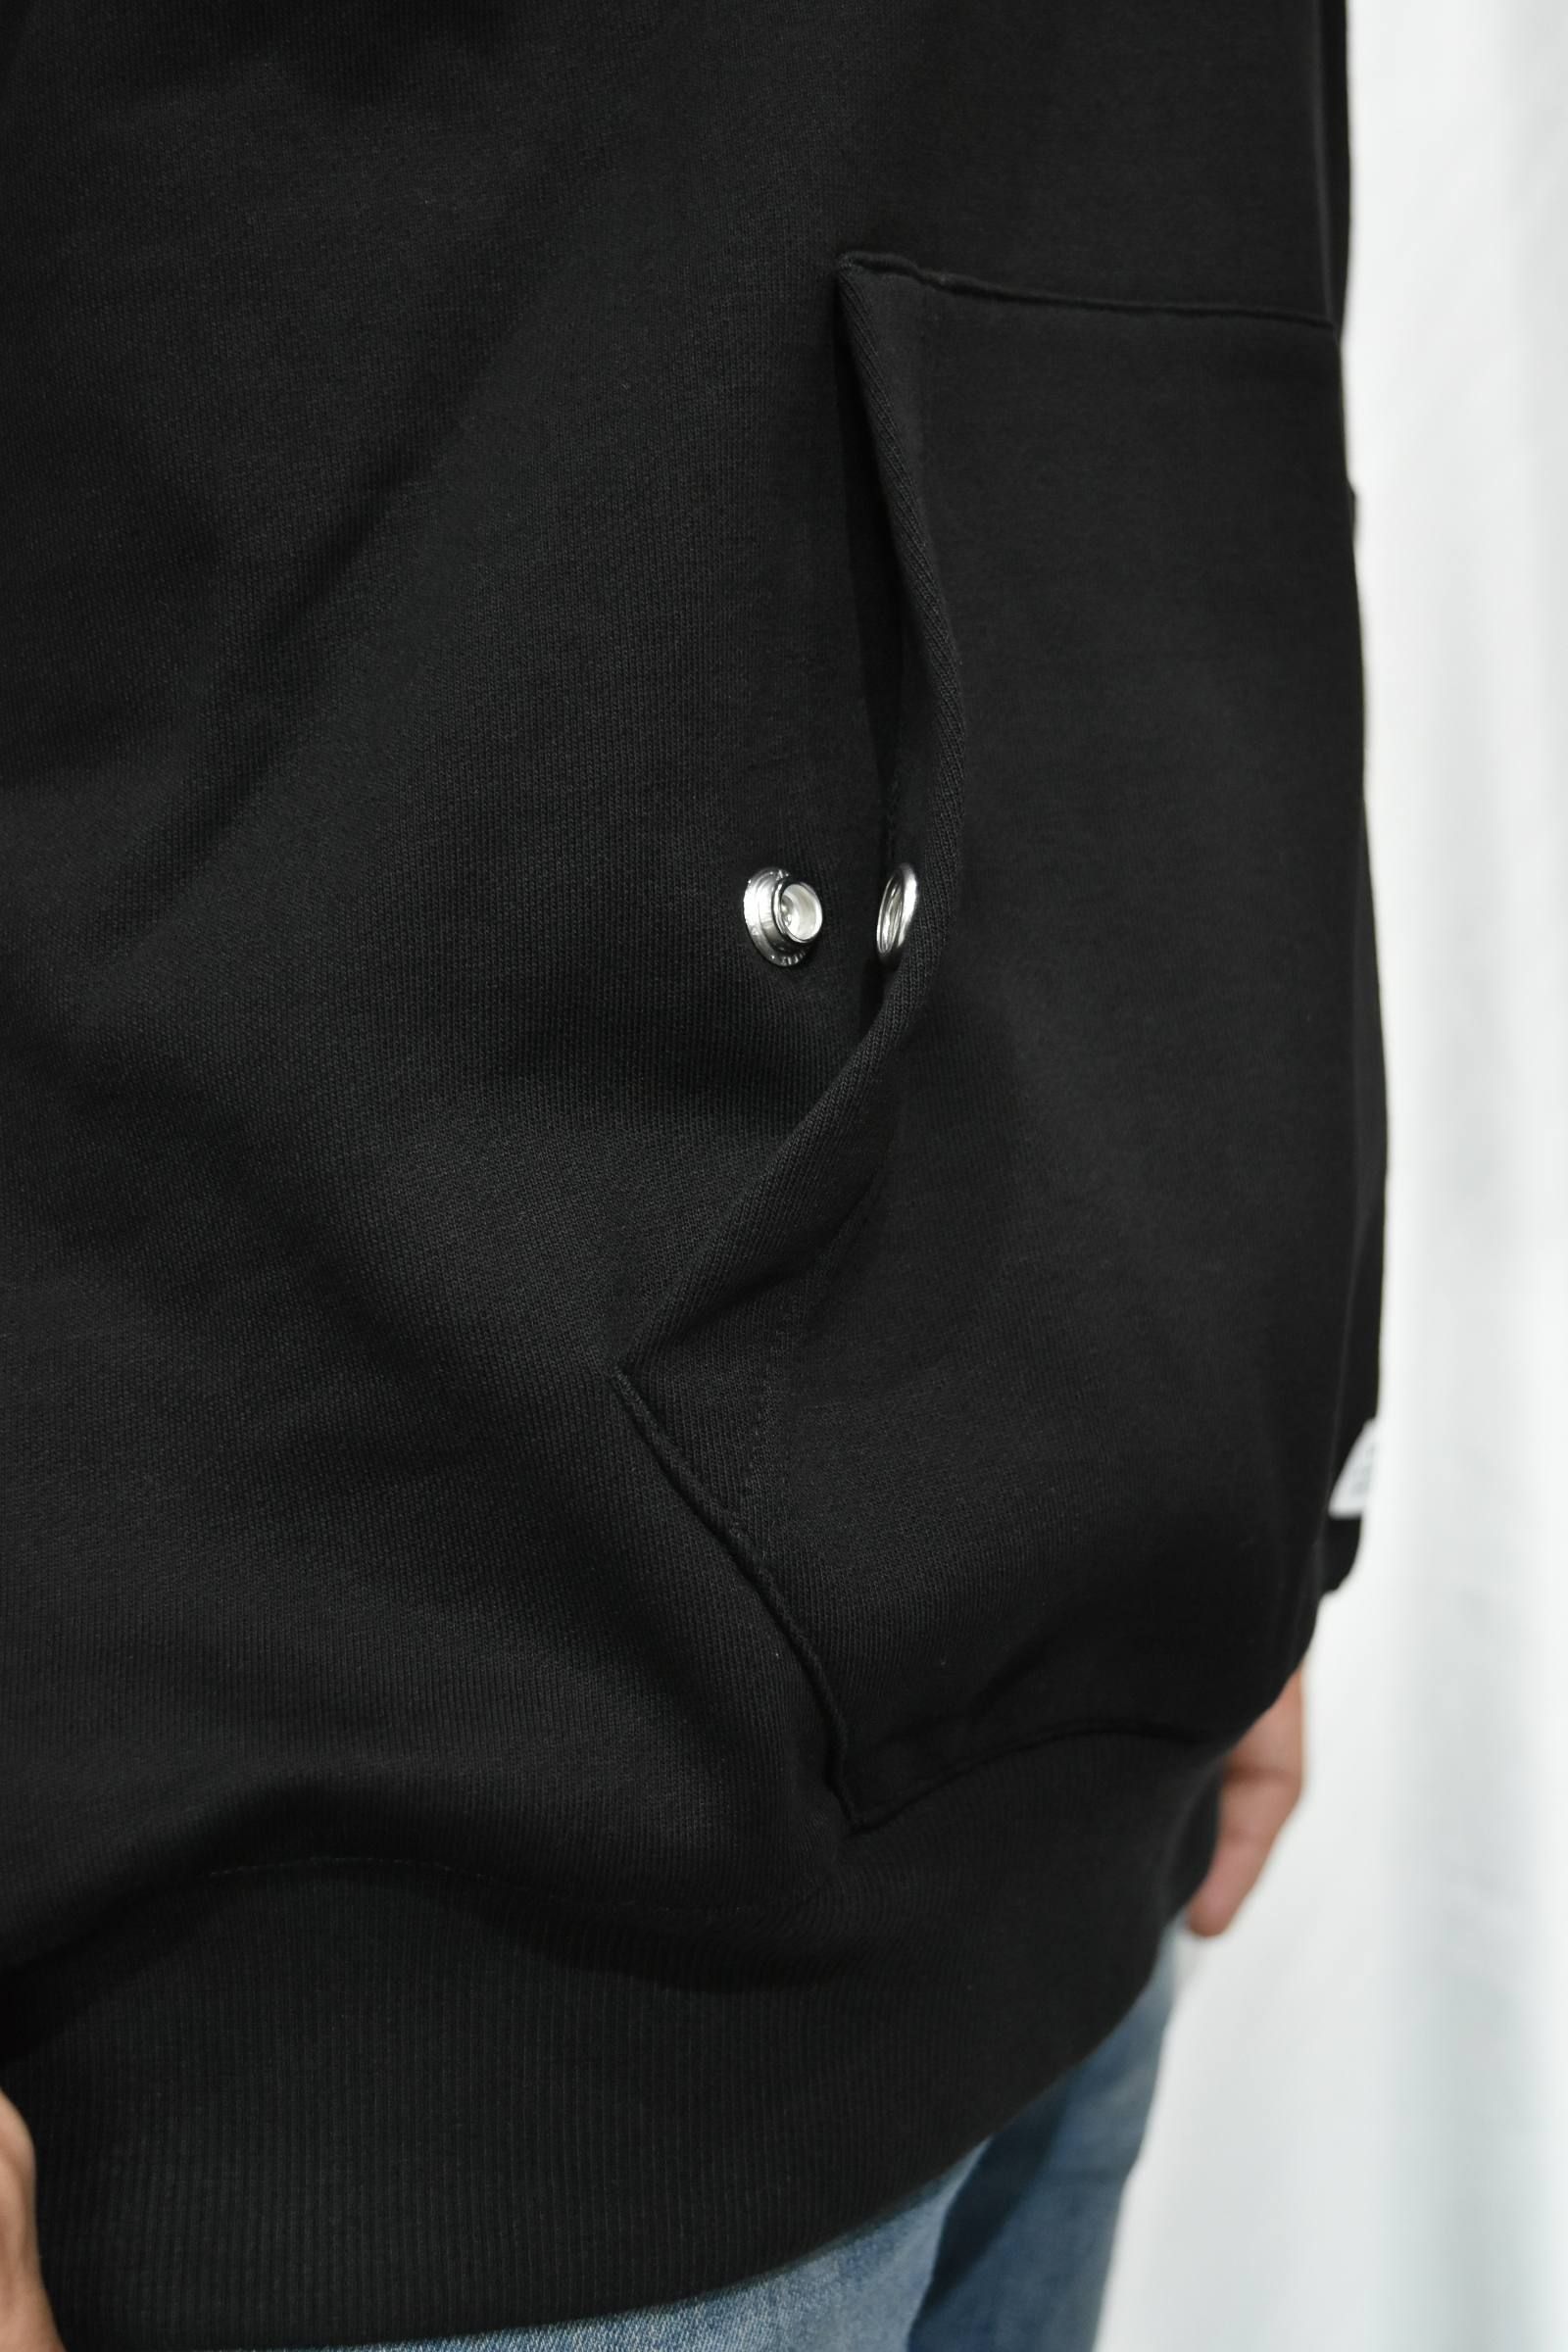 STAMPD - Strapped Hoodie” | chord online store